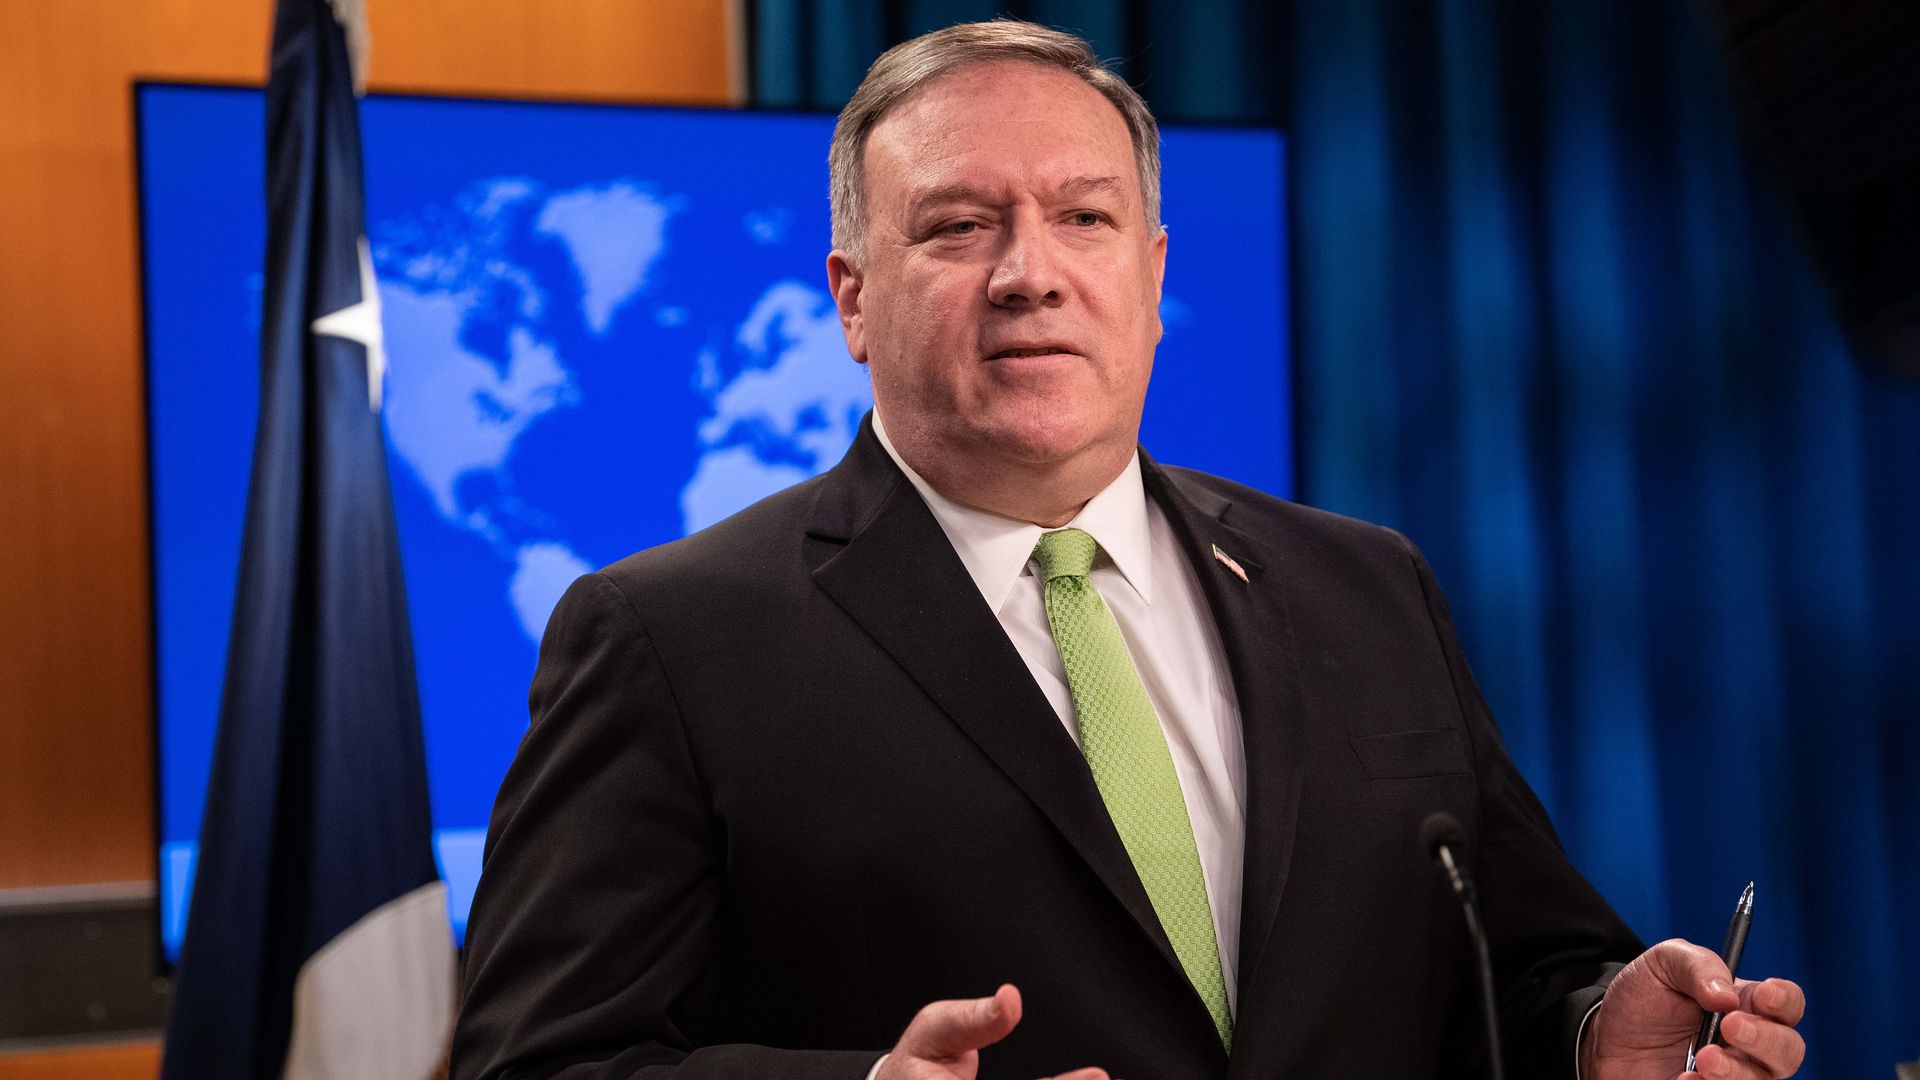 In this image, Pompeo stands in front of a flag and map